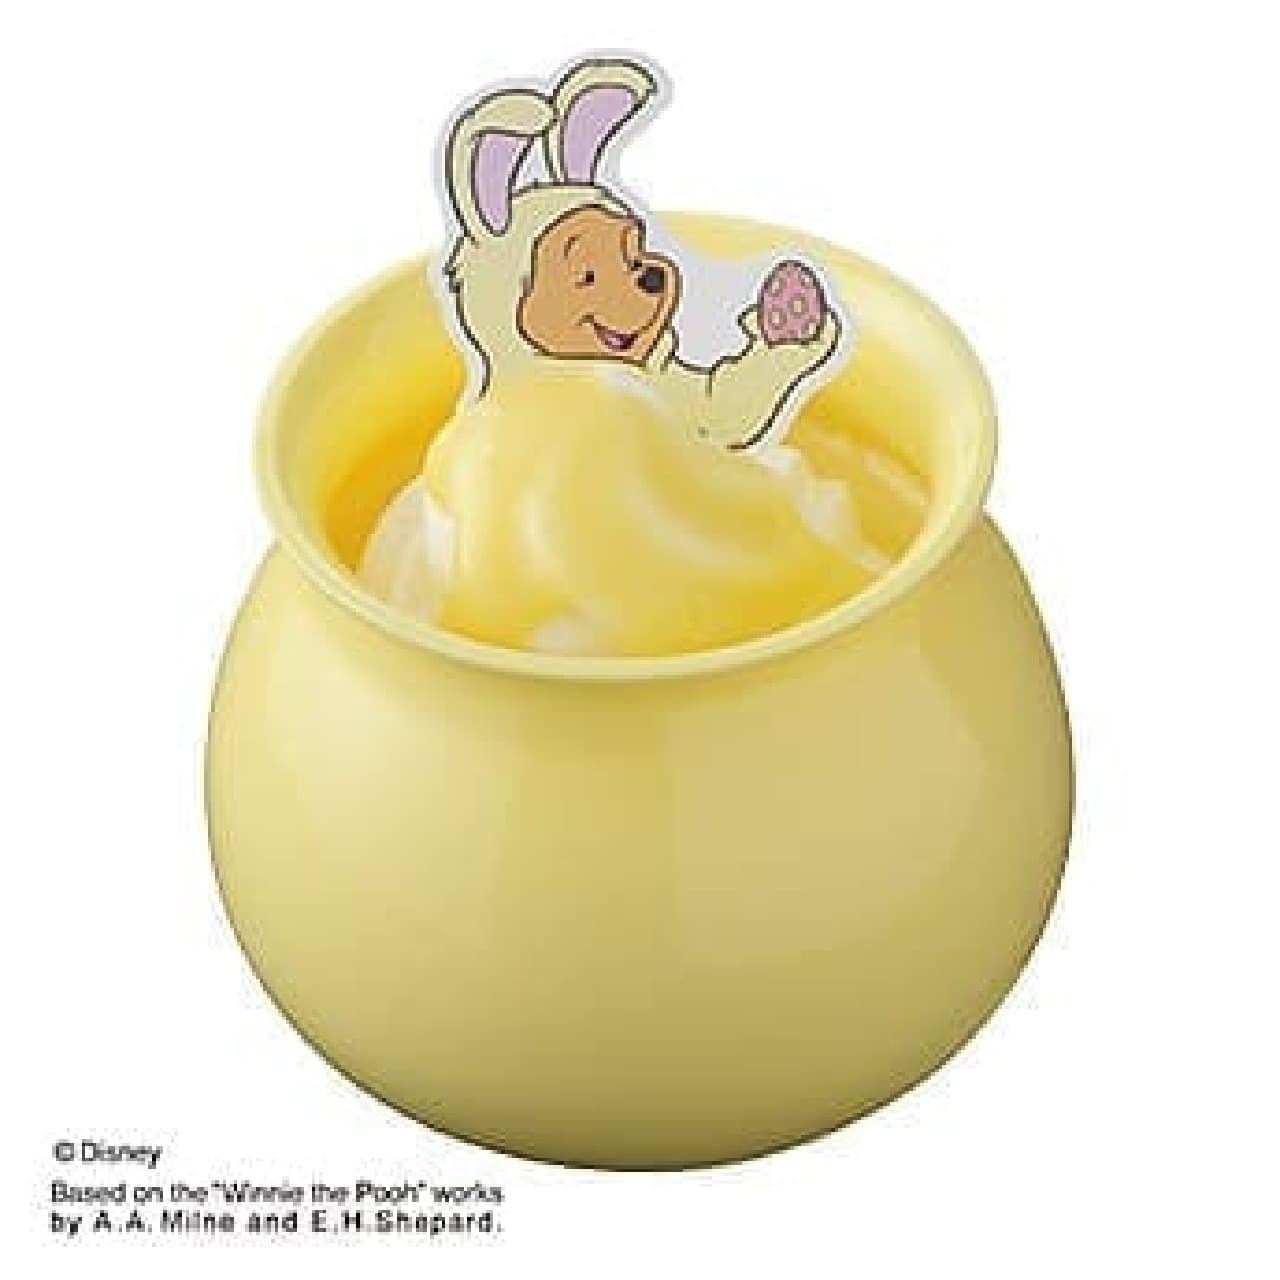 "Easter pudding (Winnie the Pooh)"